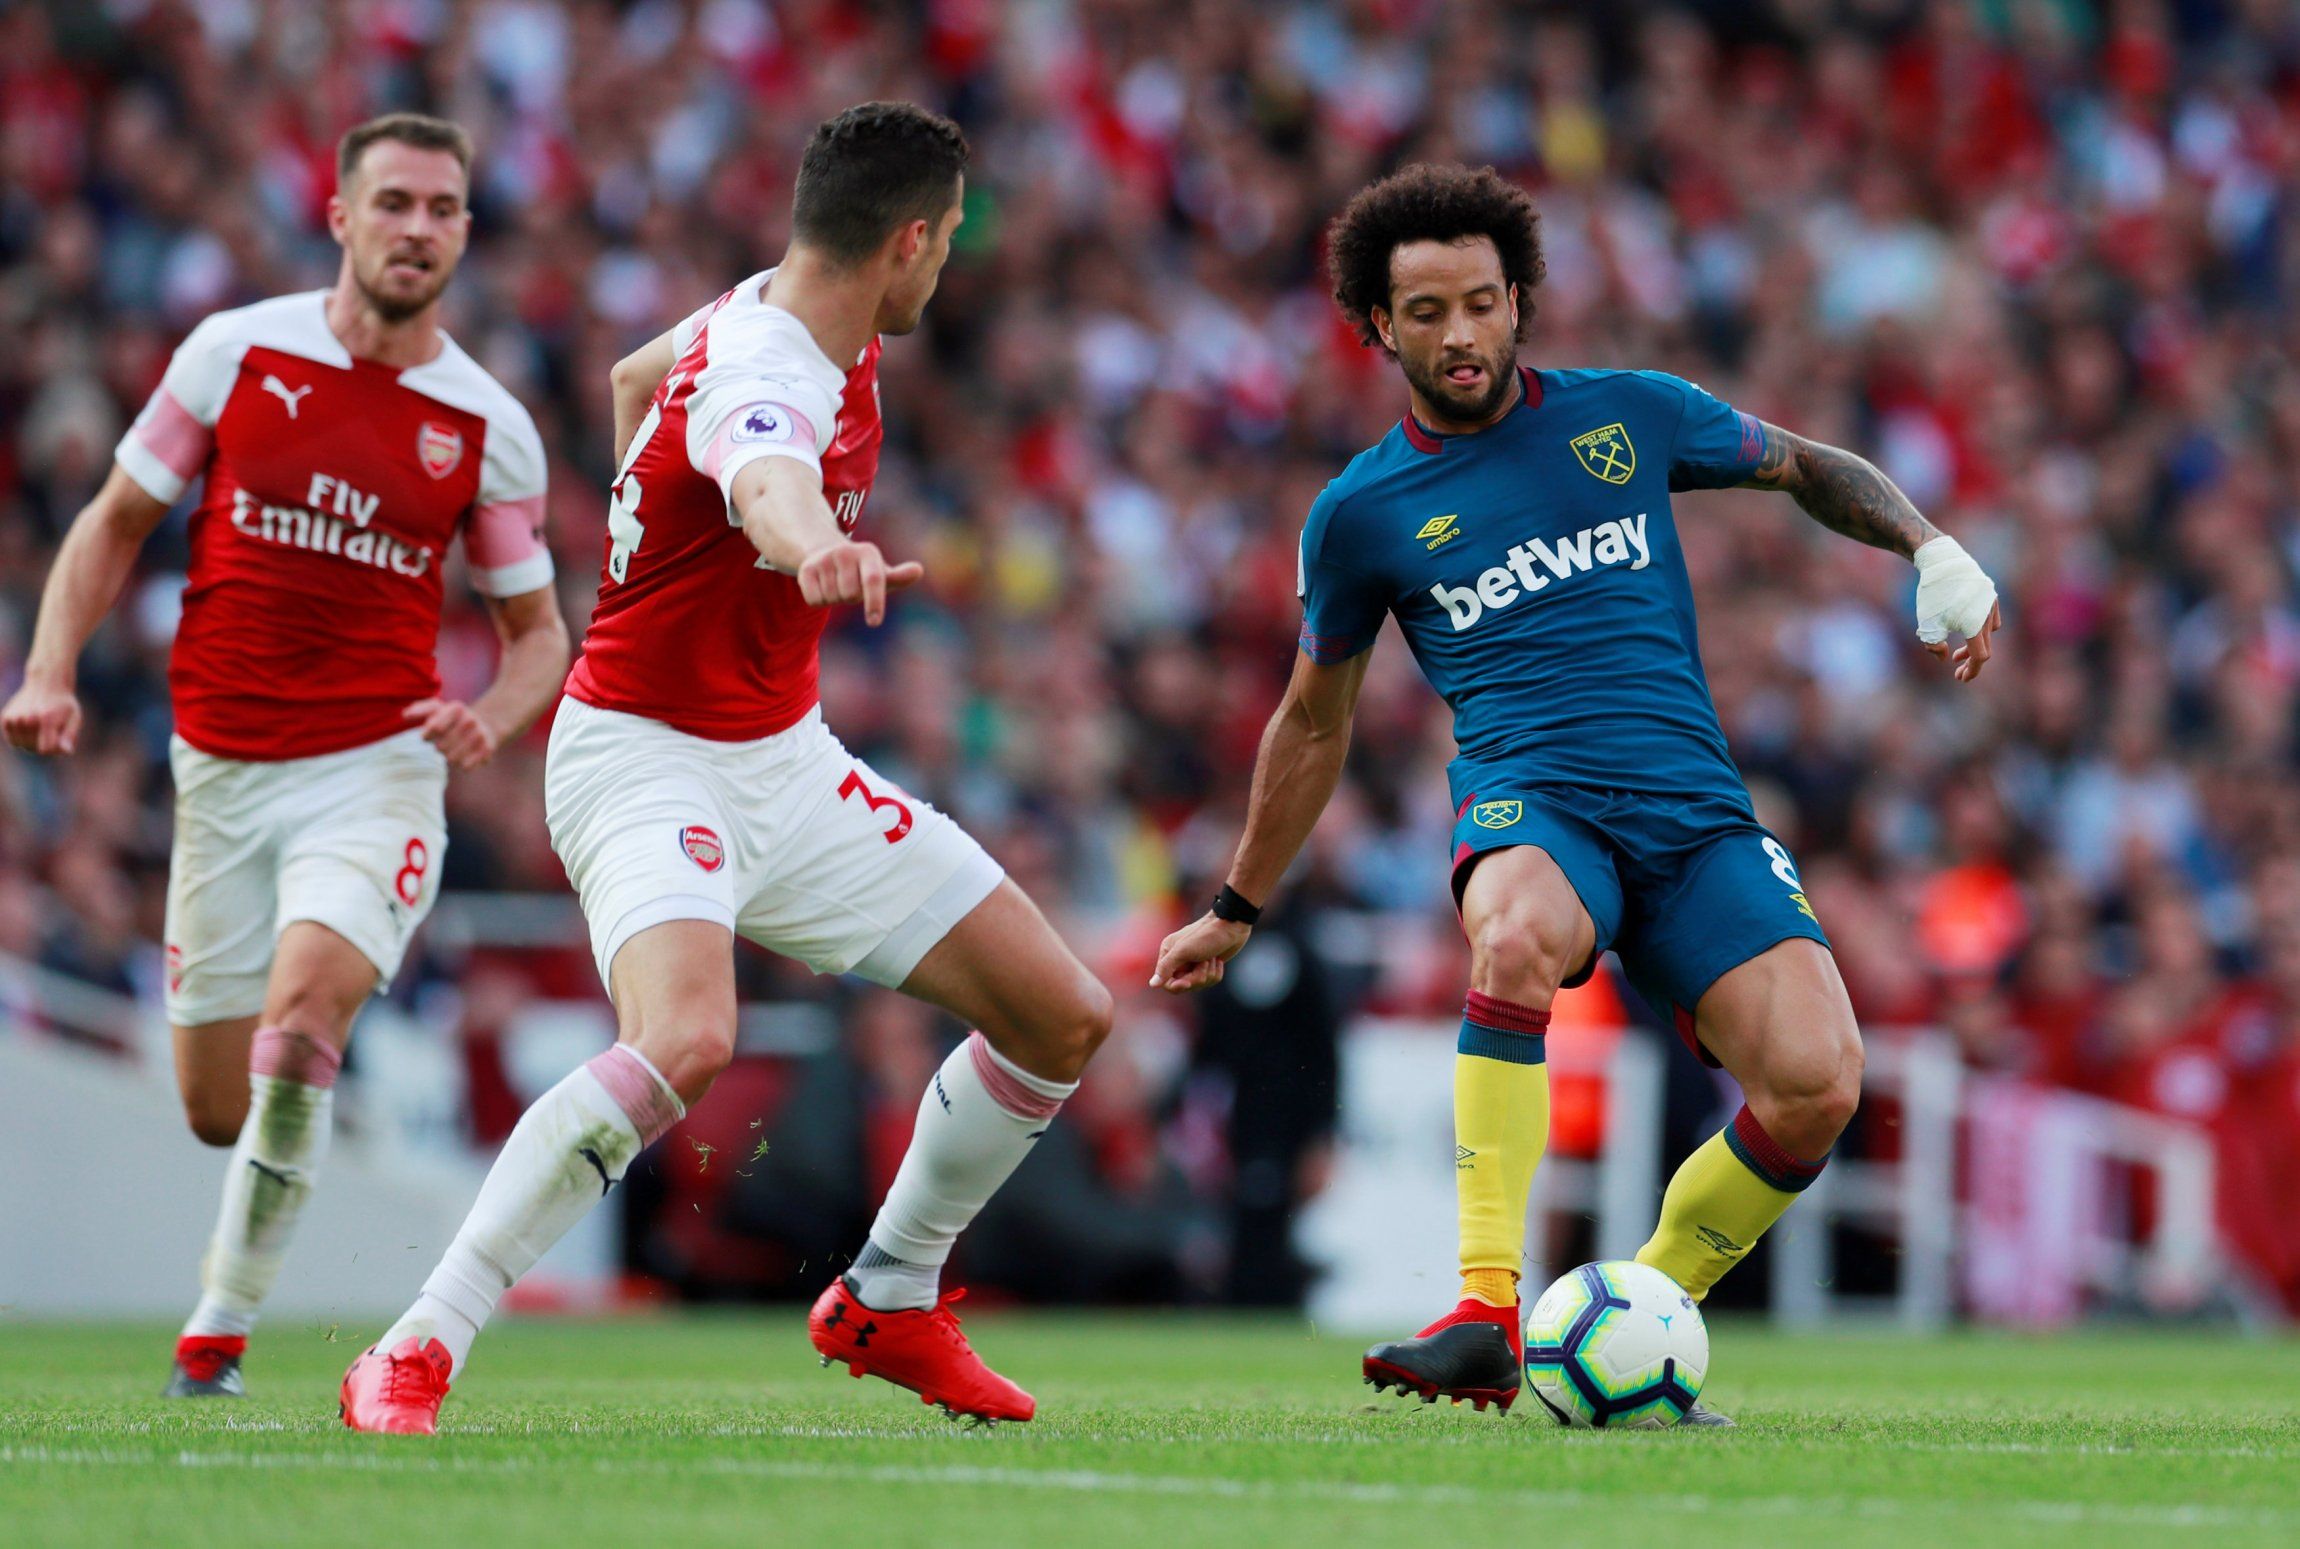 Anderson in action against Arsenal's Xhaka